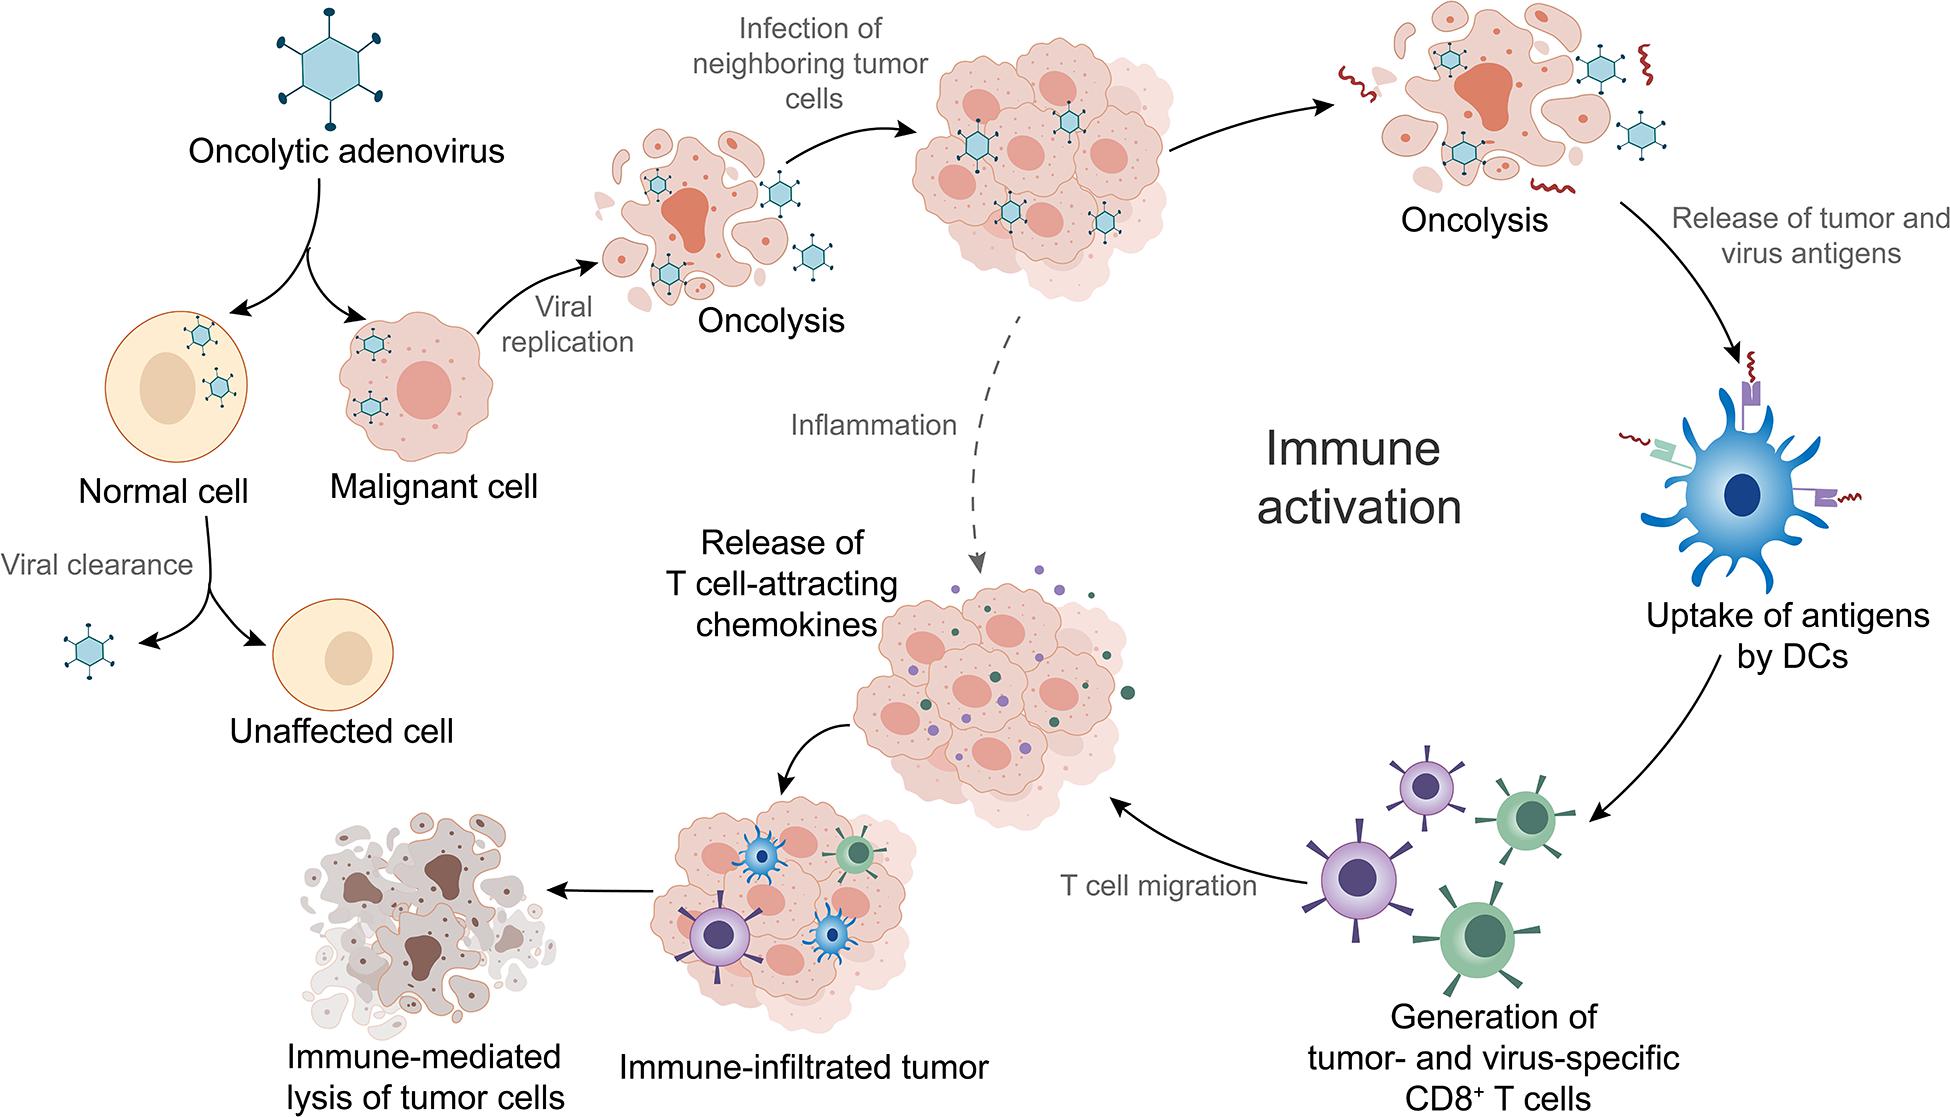 Frontiers | Oncolytic Adenovirus: Prospects for Cancer Immunotherapy